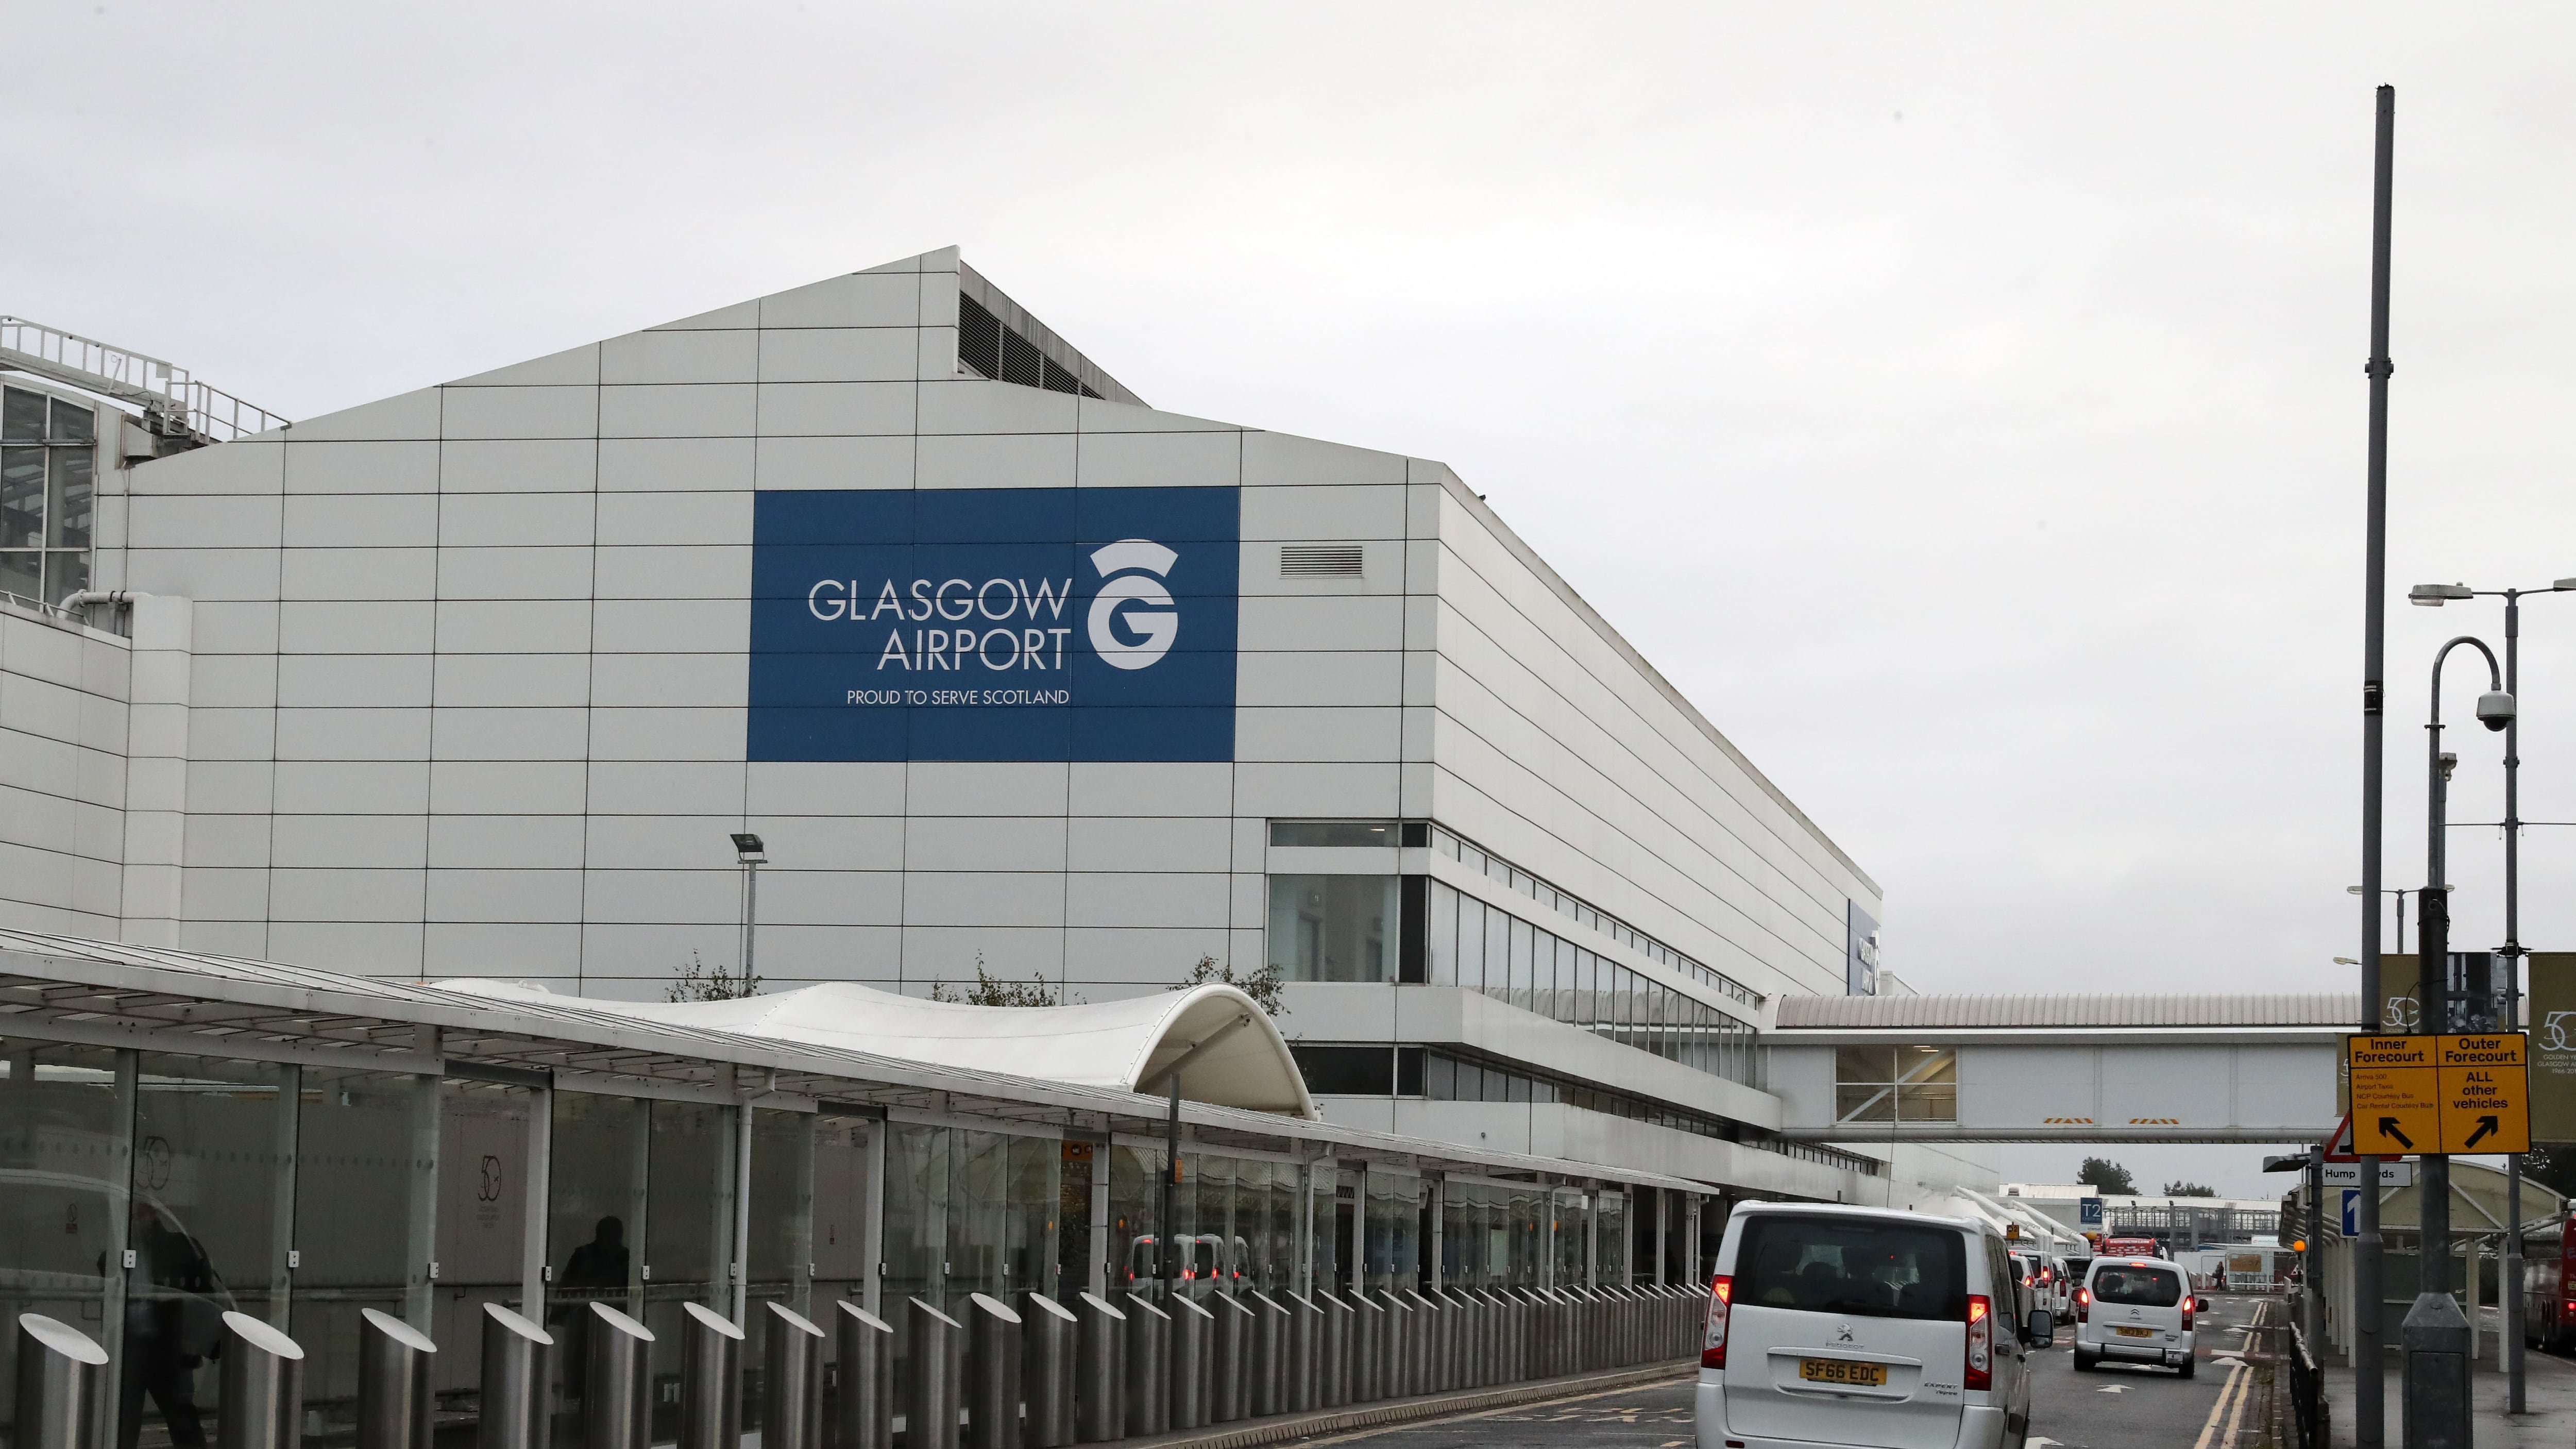 Workers at Glasgow Airport will be among those balloted for industrial action